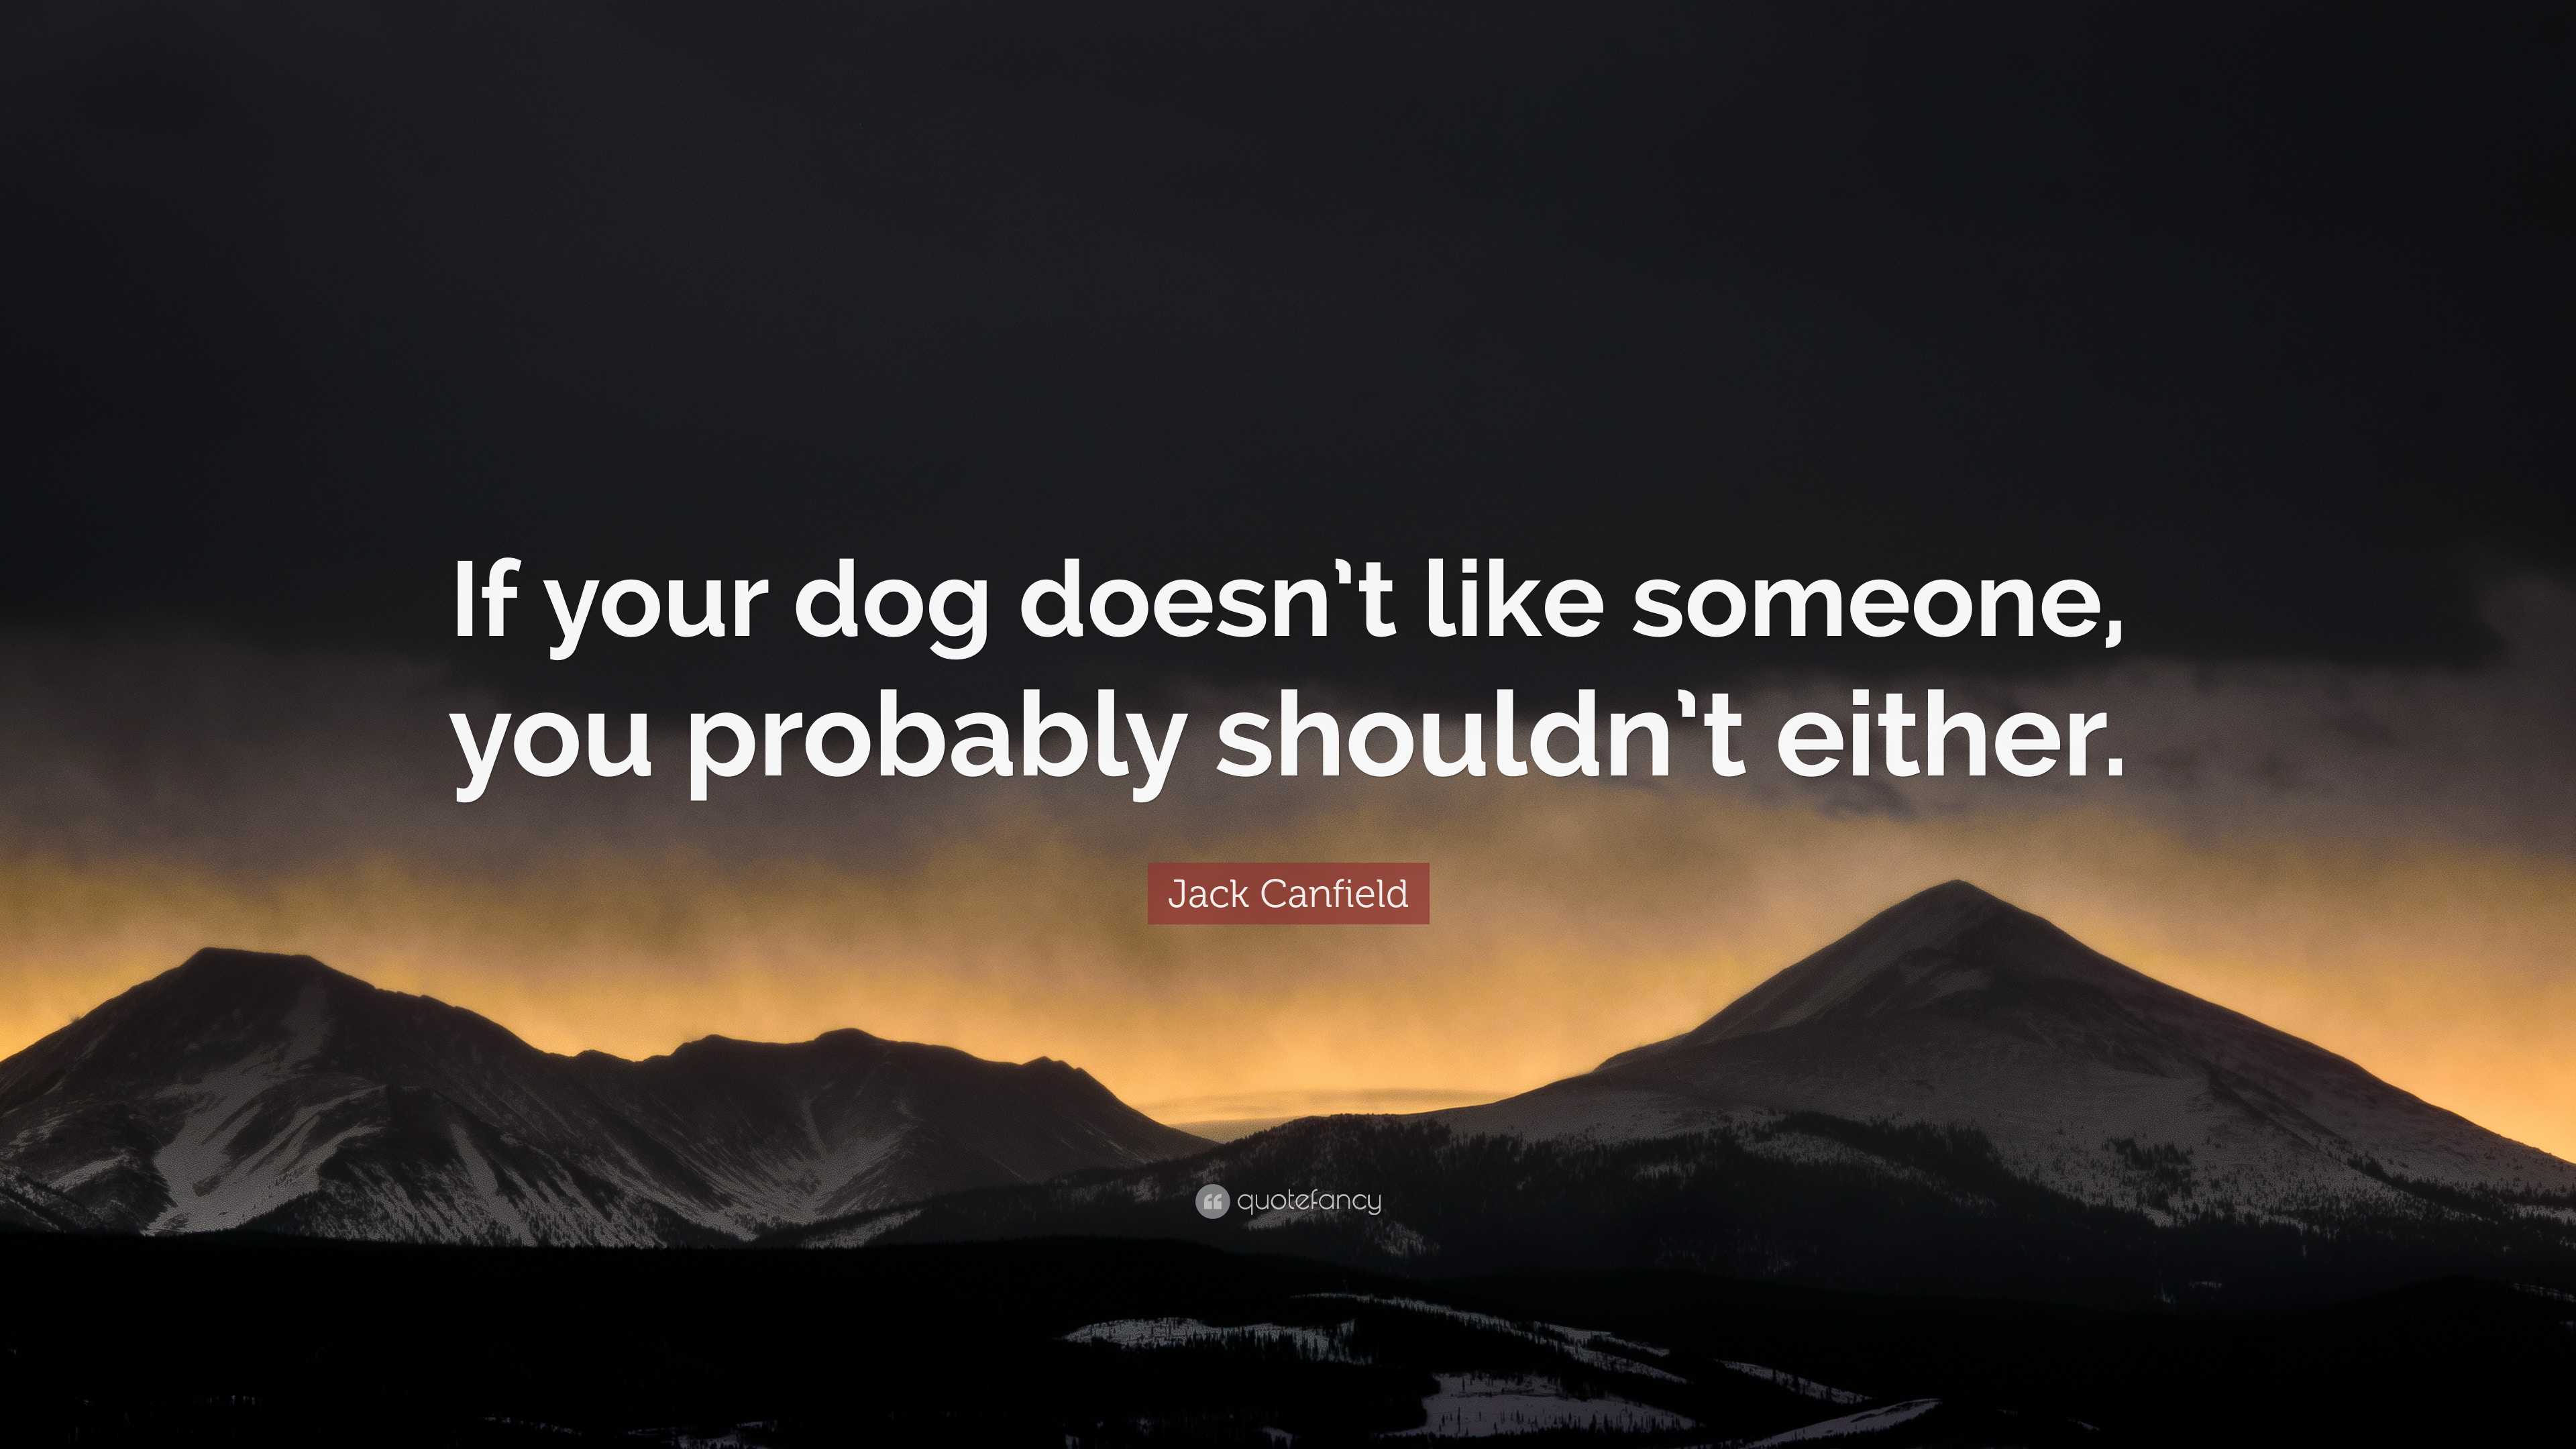 Jack Canfield Quote: “If your dog doesn’t like someone, you probably ...